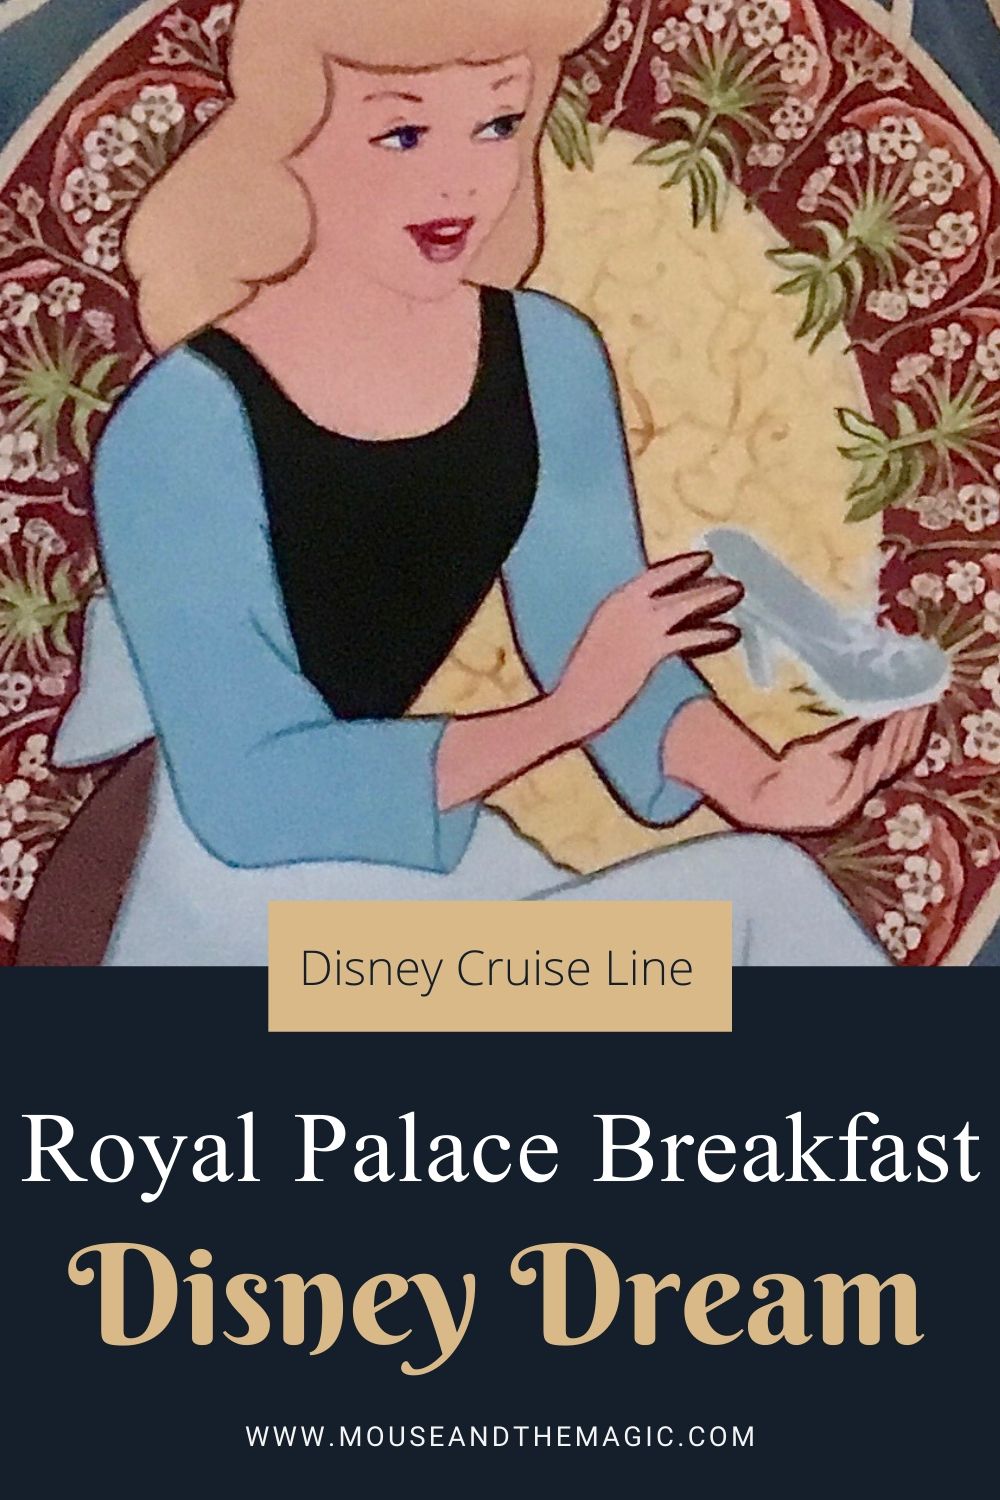 Breakfast at Royal Palace on the Disney Dream